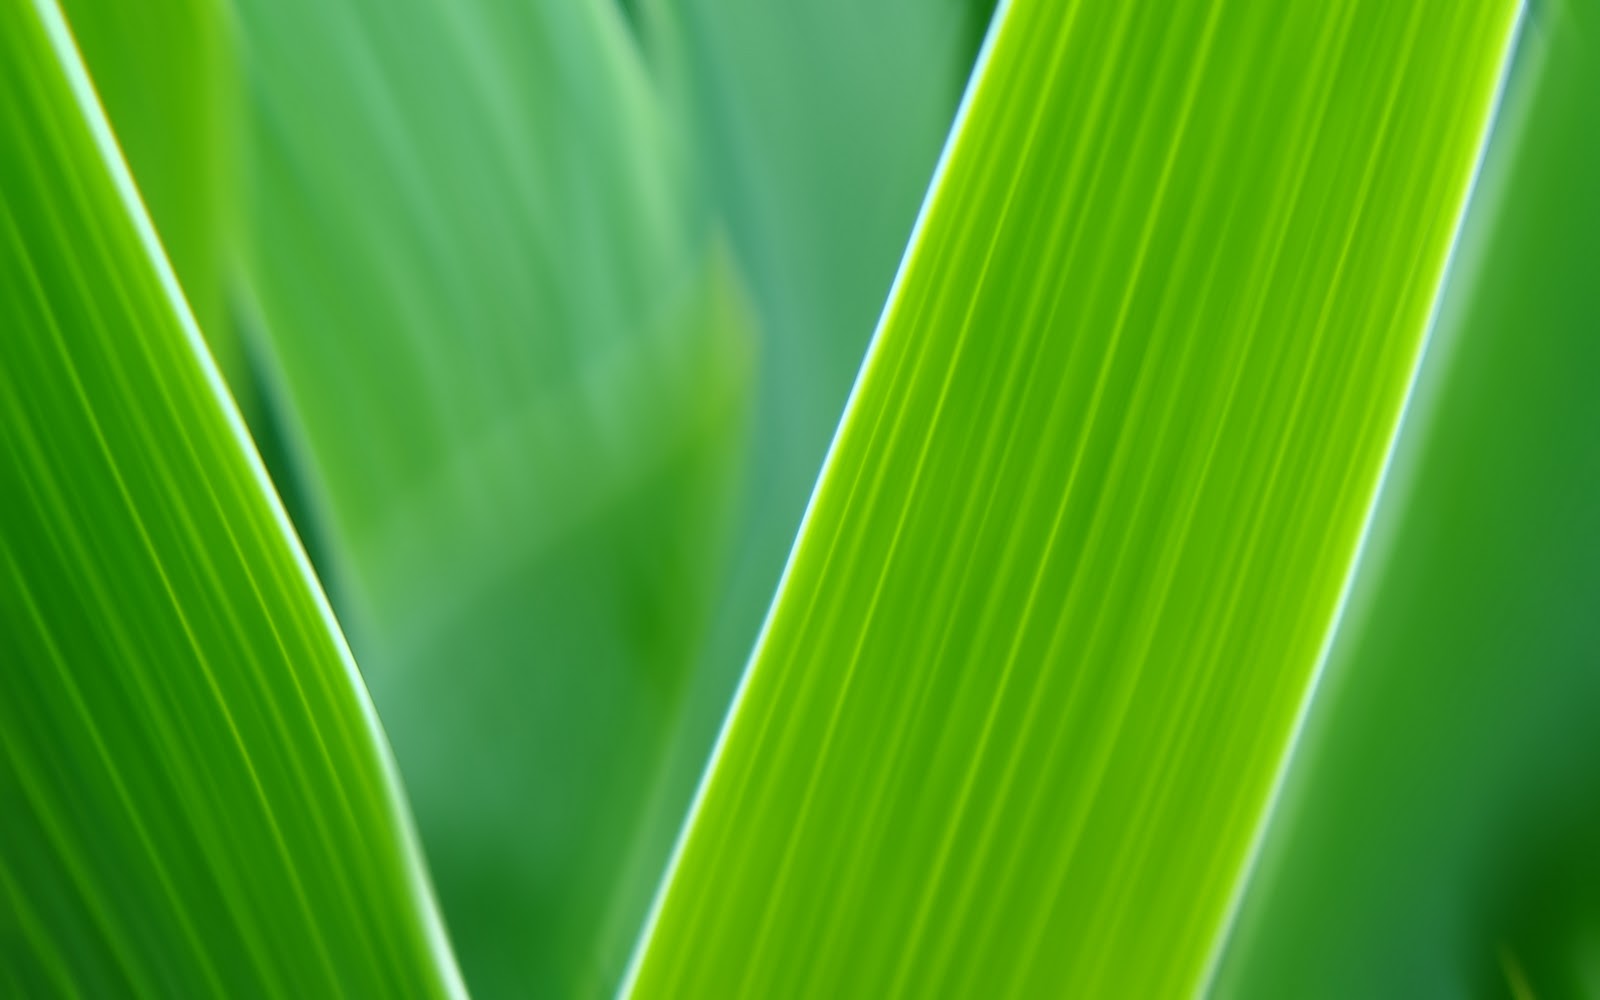 HQ Wallpapers: Green Leaves with noise 1920x1200 Wallpapers